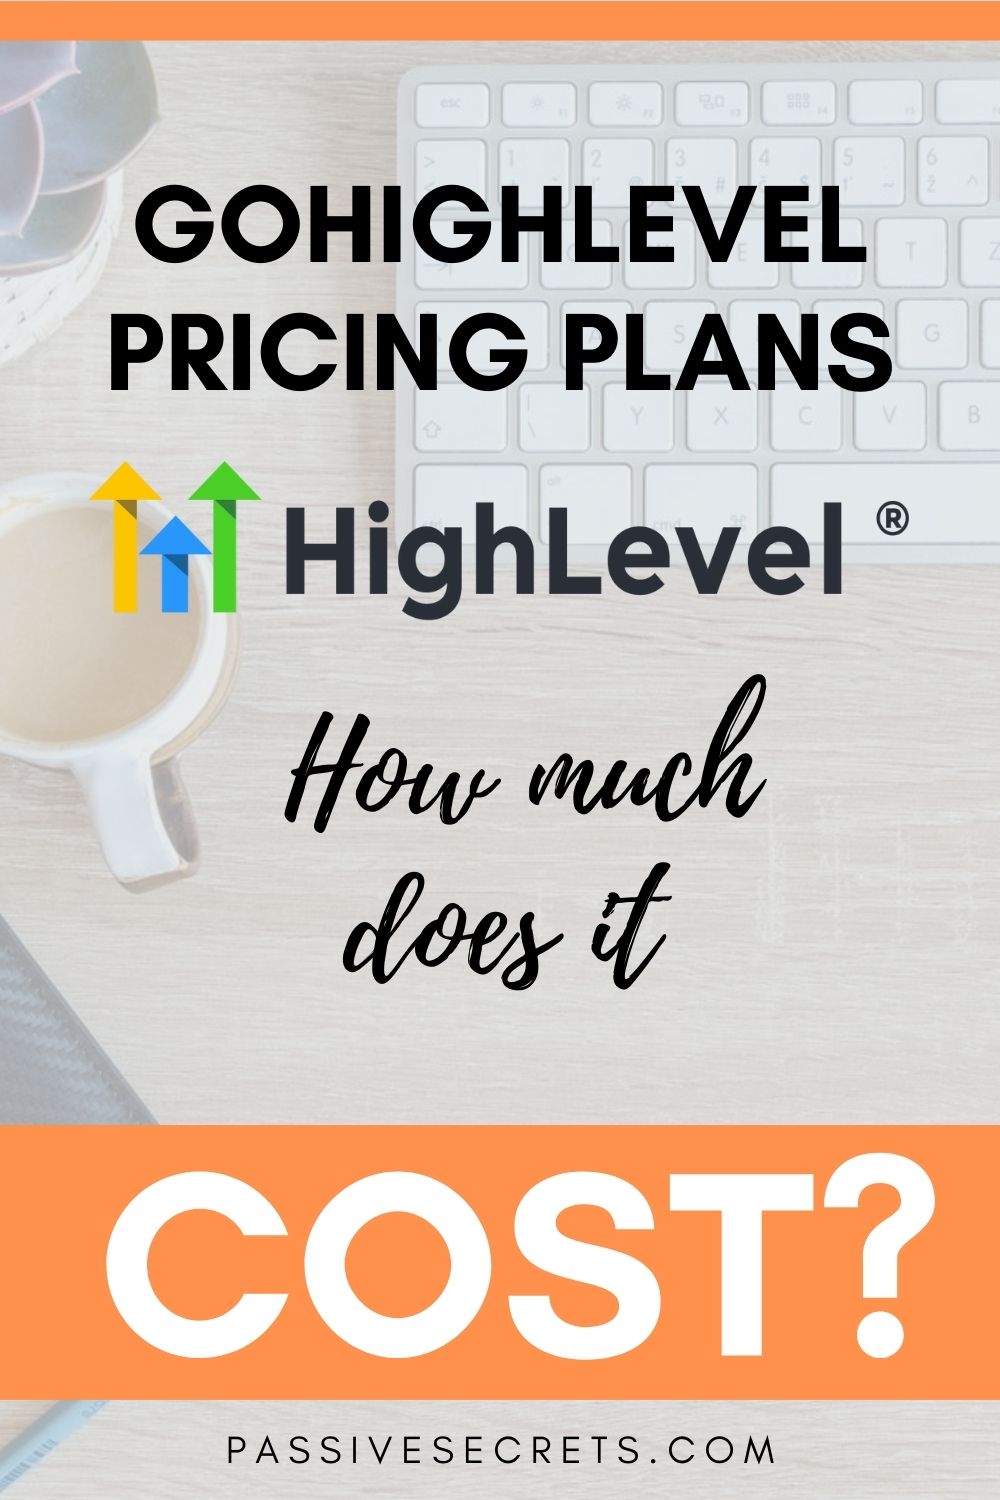 goghiglevel pricing plans and cost Passive Secrets